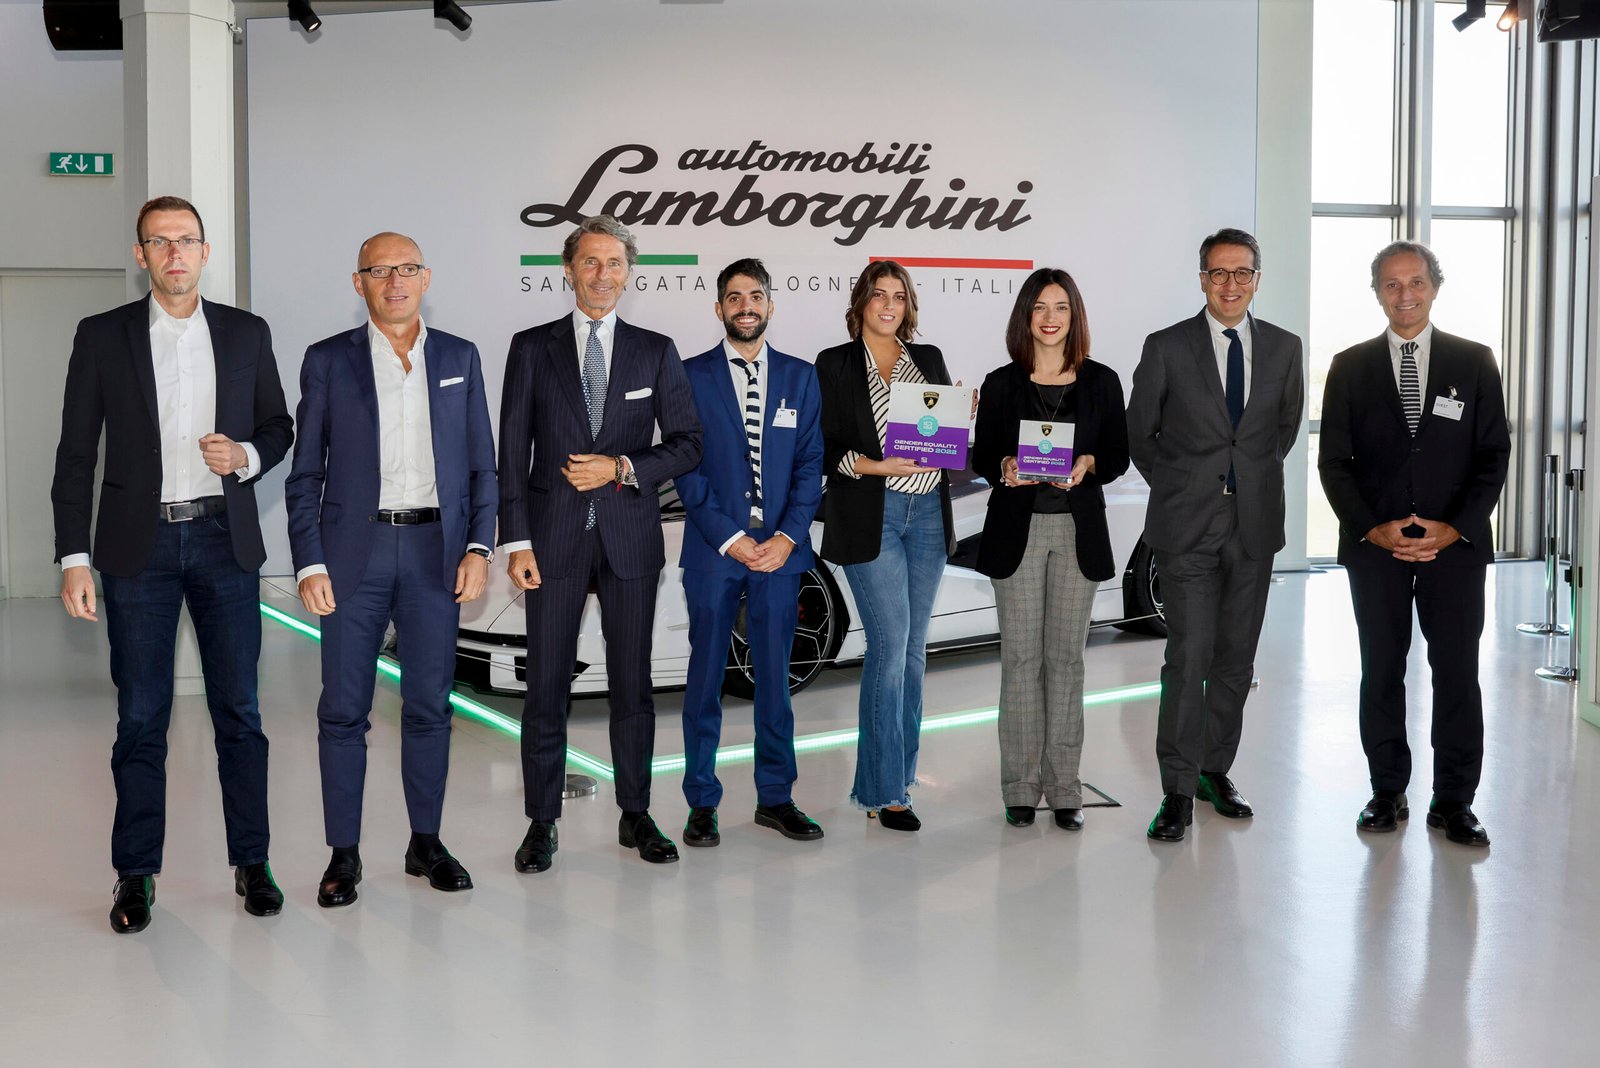 Automobili Lamborghini obtains the IDEM certification for its equality policy